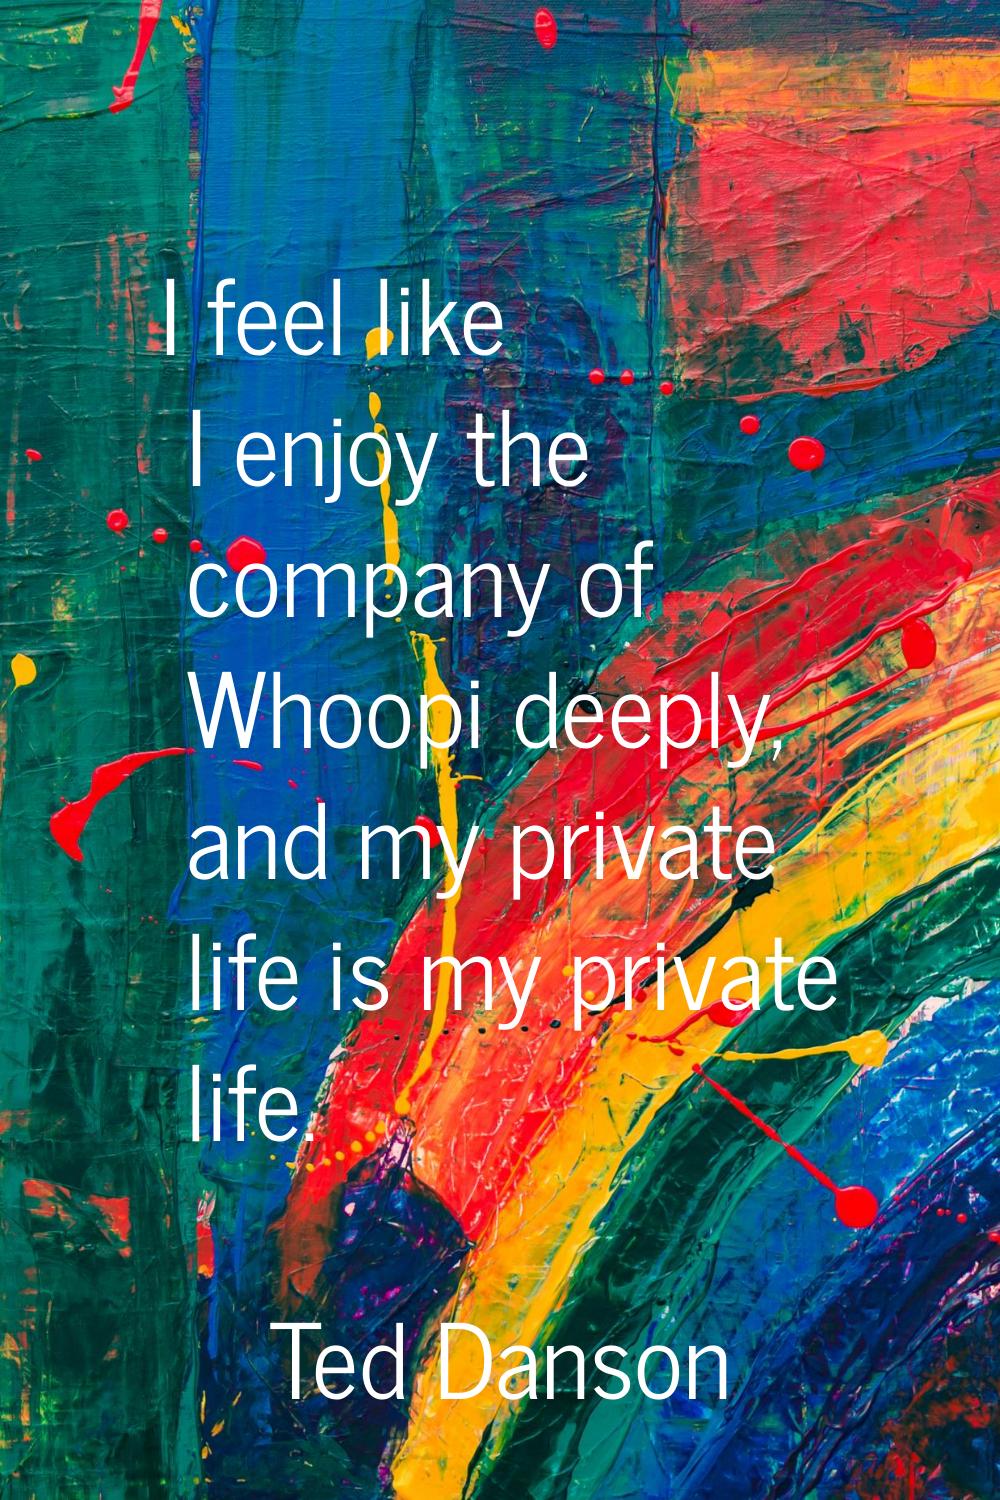 I feel like I enjoy the company of Whoopi deeply, and my private life is my private life.